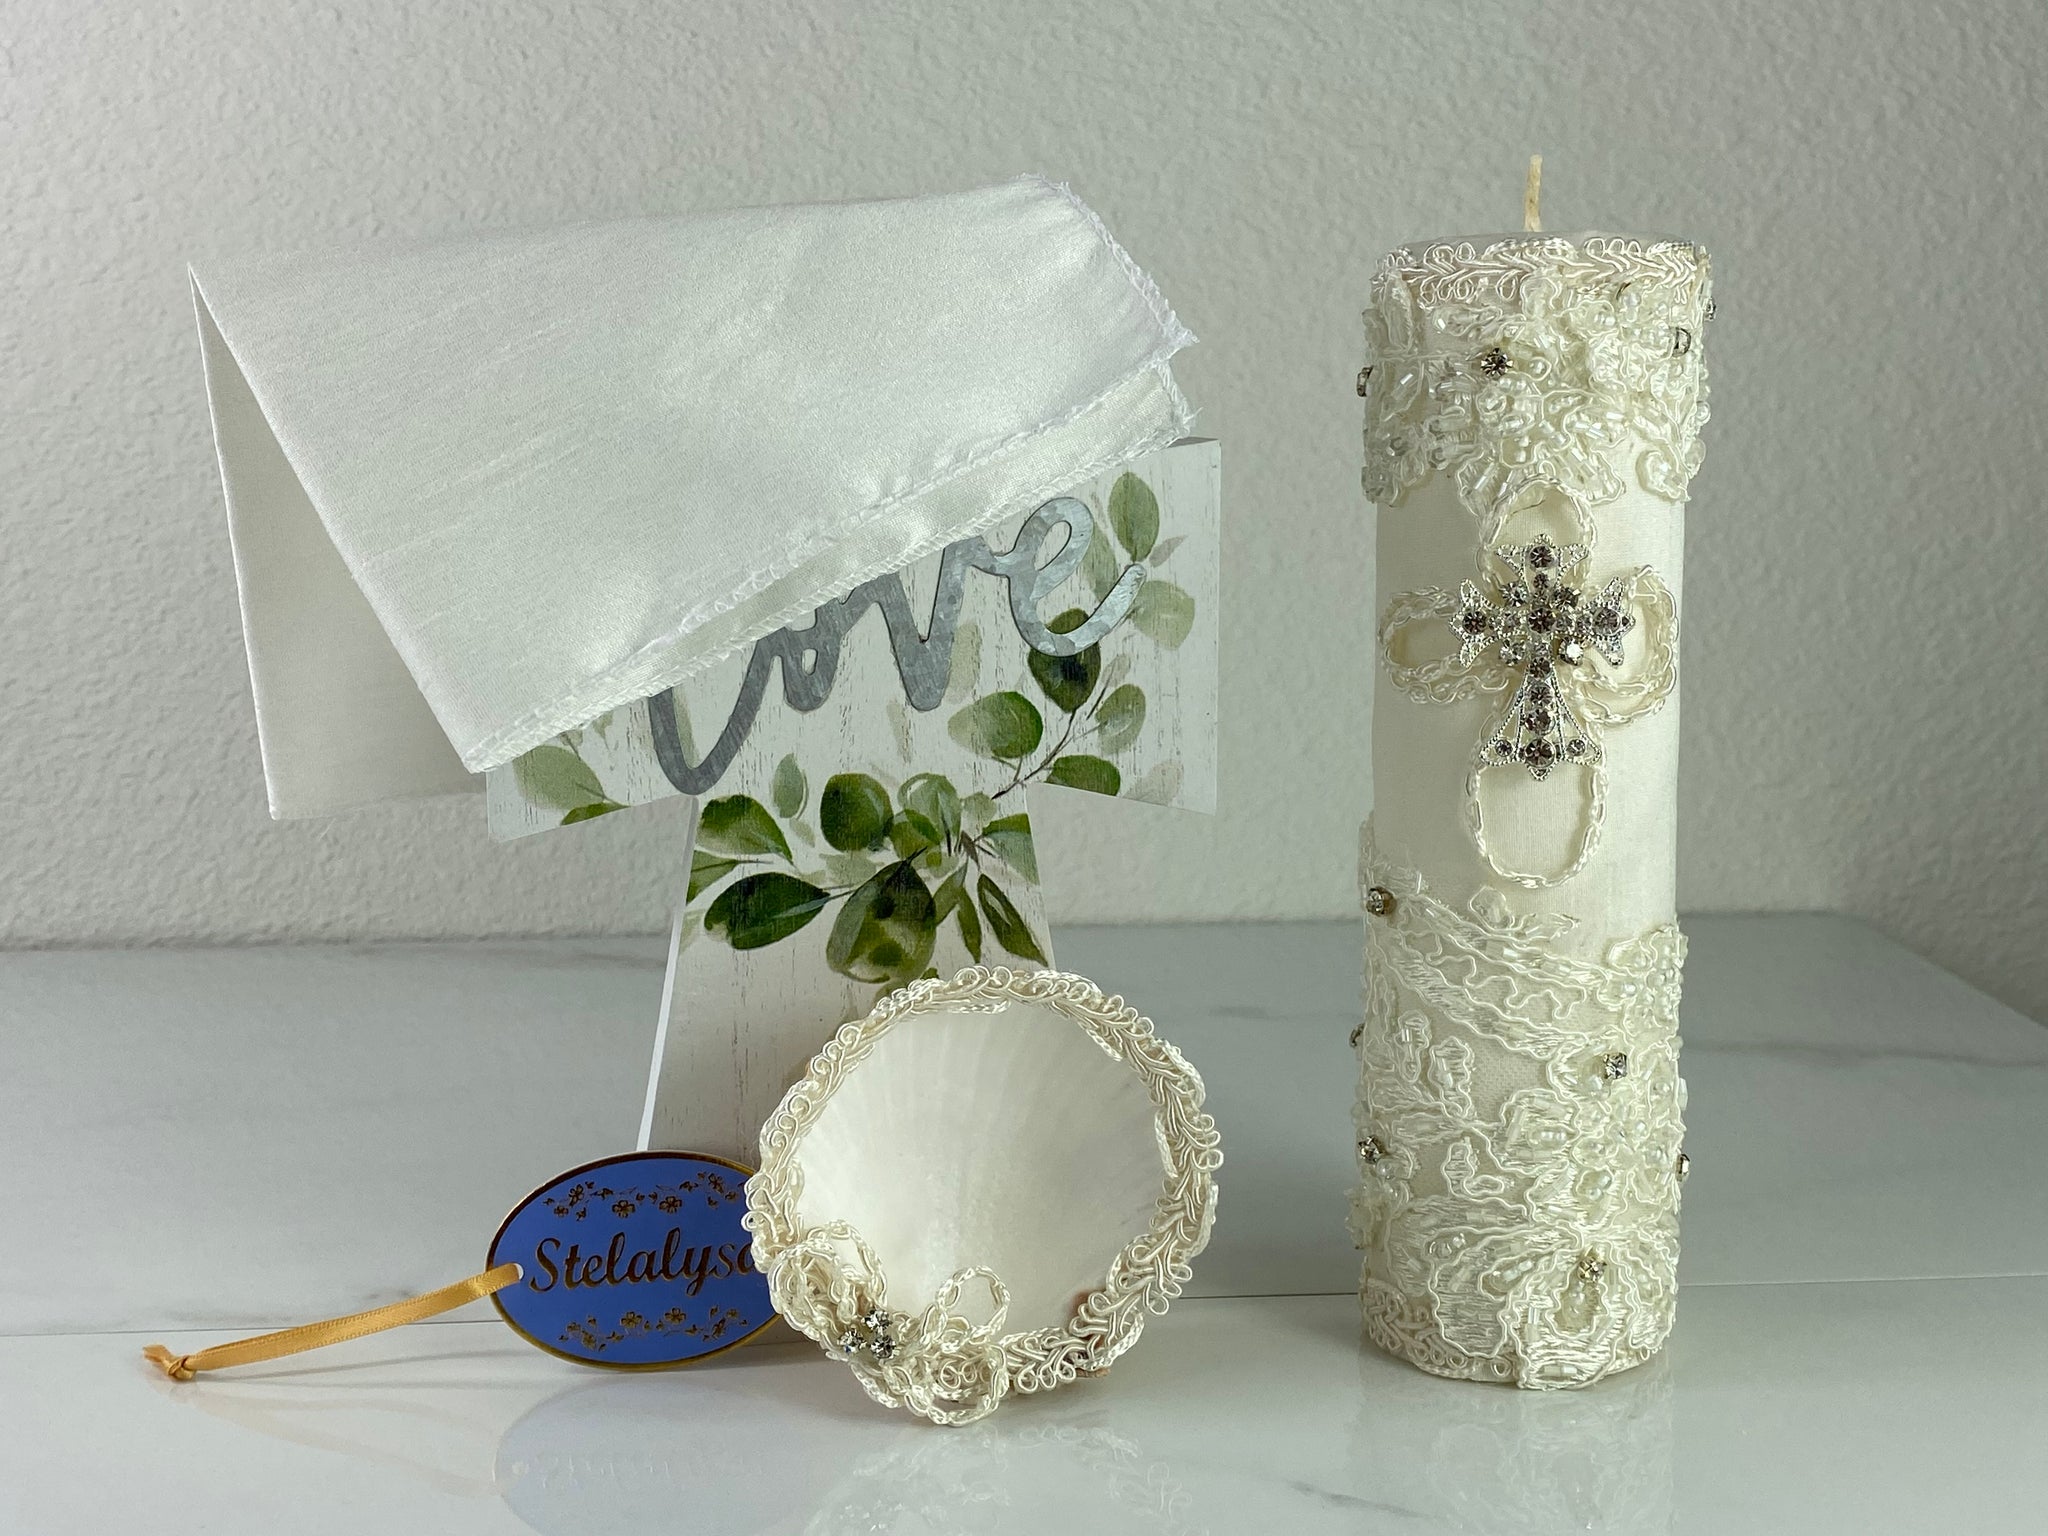 These one-of-a-kind Candle set is handmade and ivory in color.  This candle beautifully wrapped in lace.   It is decorated with a cross made of crystals making it a gorgeous keepsake.   This candle is cylinder in shape.    To match, the Shell is put together piece by piece to compliment the Candle and Handkerchief.  The Handkerchief is made of satin and embroidered lace to match the Shell and Candle beautifully.  